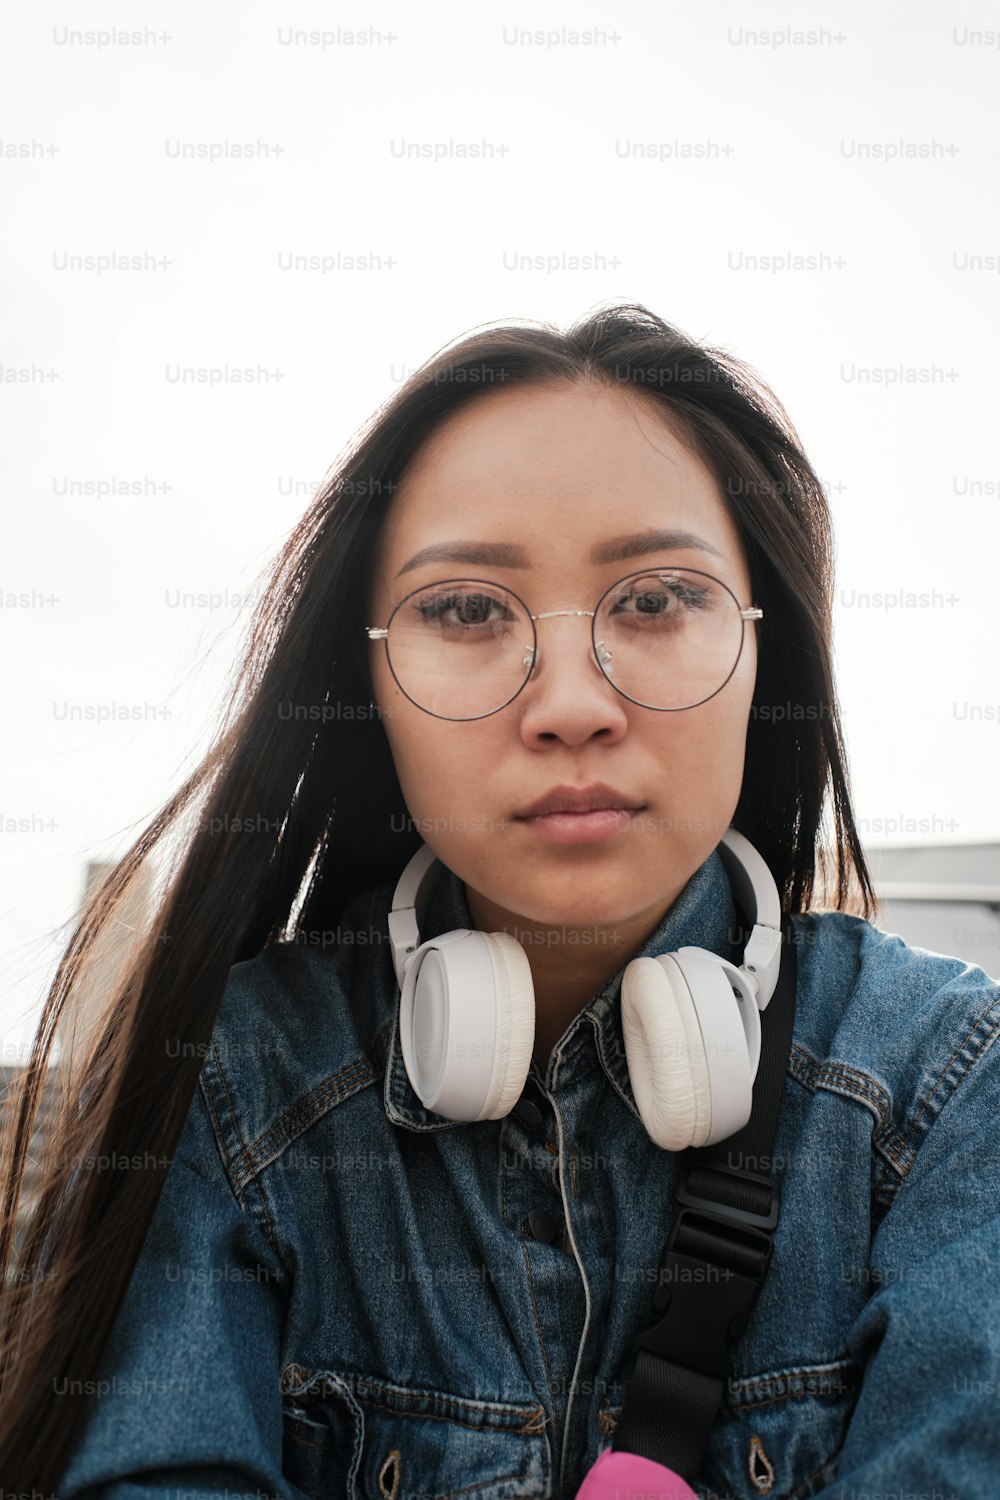 Portrait of an asian girl wearing glasses and headphones looking straight at the camera.